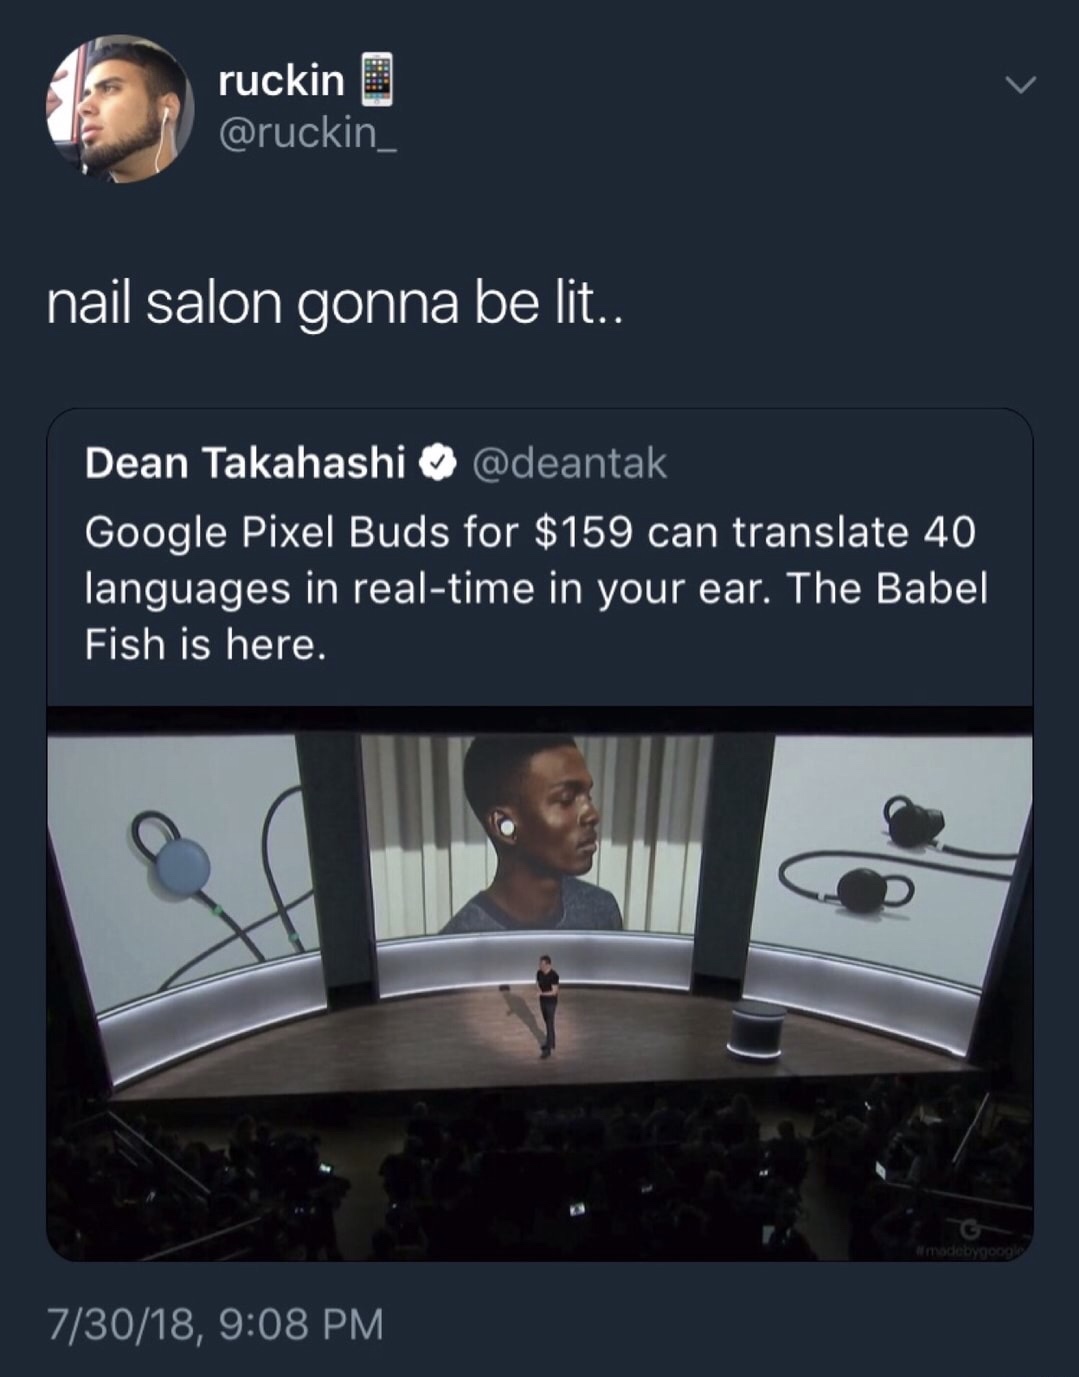 memes - google pixel buds meme - ruckin 3 nail salon gonna be lit.. Dean Takahashi Google Pixel Buds for $159 can translate 40 languages in realtime in your ear. The Babel Fish is here. madebygoog 73018,